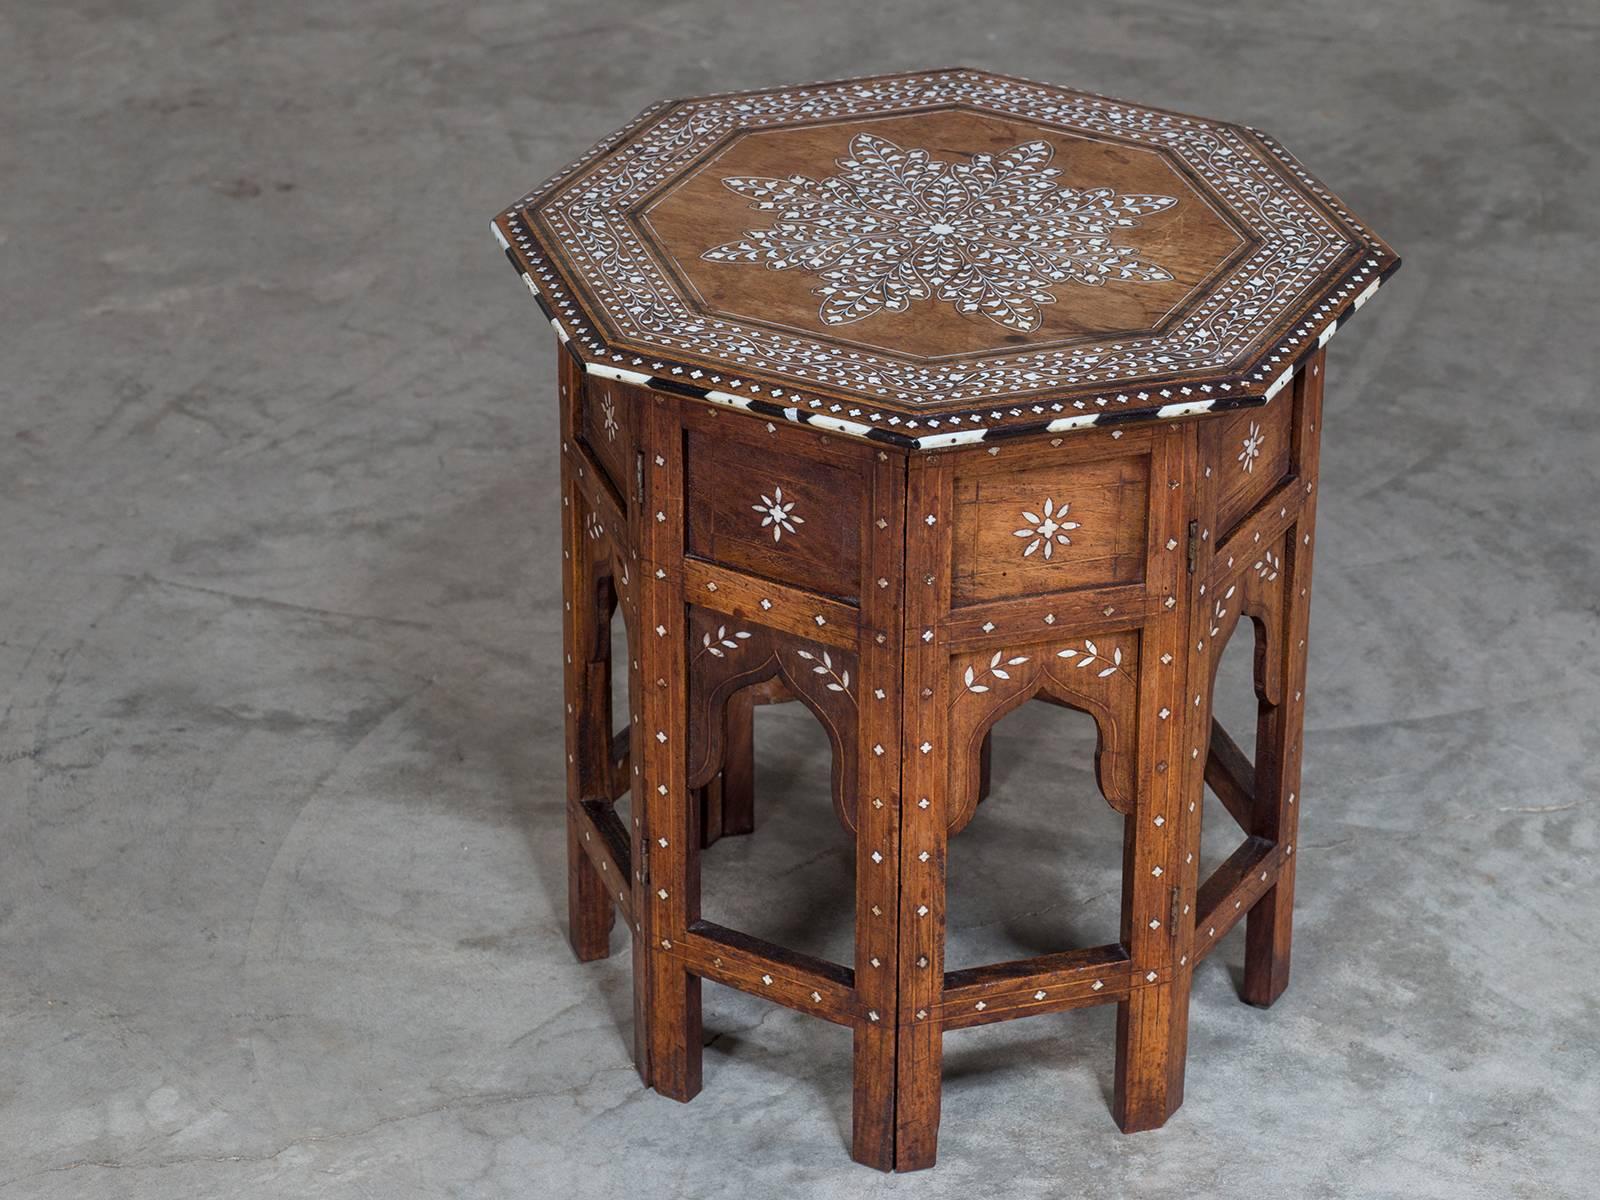 British Colonial Antique Inlaid Indian Folding Table from Hoshiapur, circa 1890